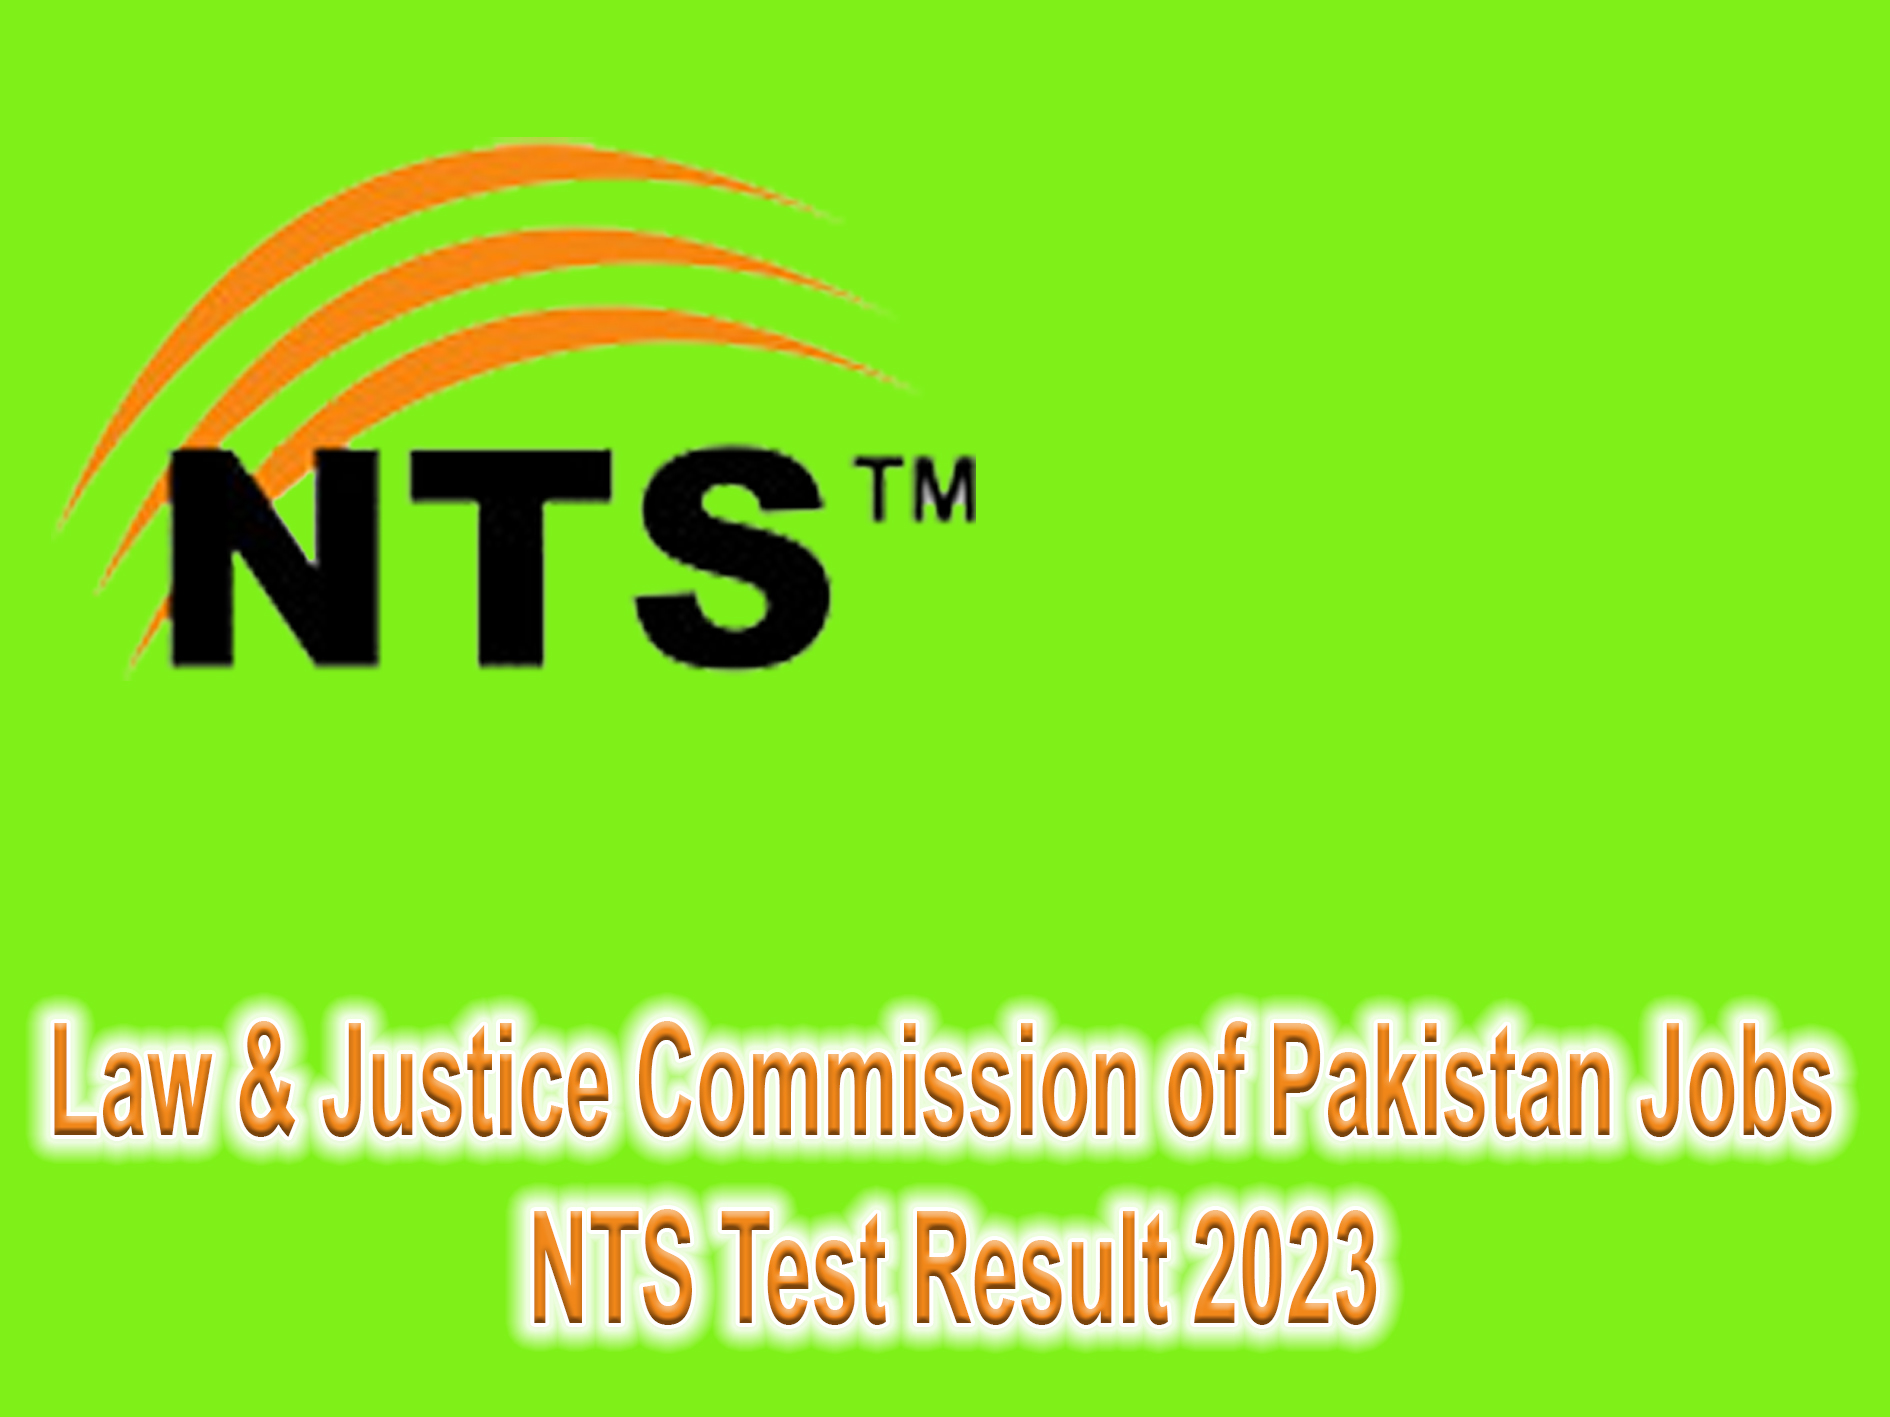 Law & Justice Commission of Pakistan Jobs NTS Result 2023